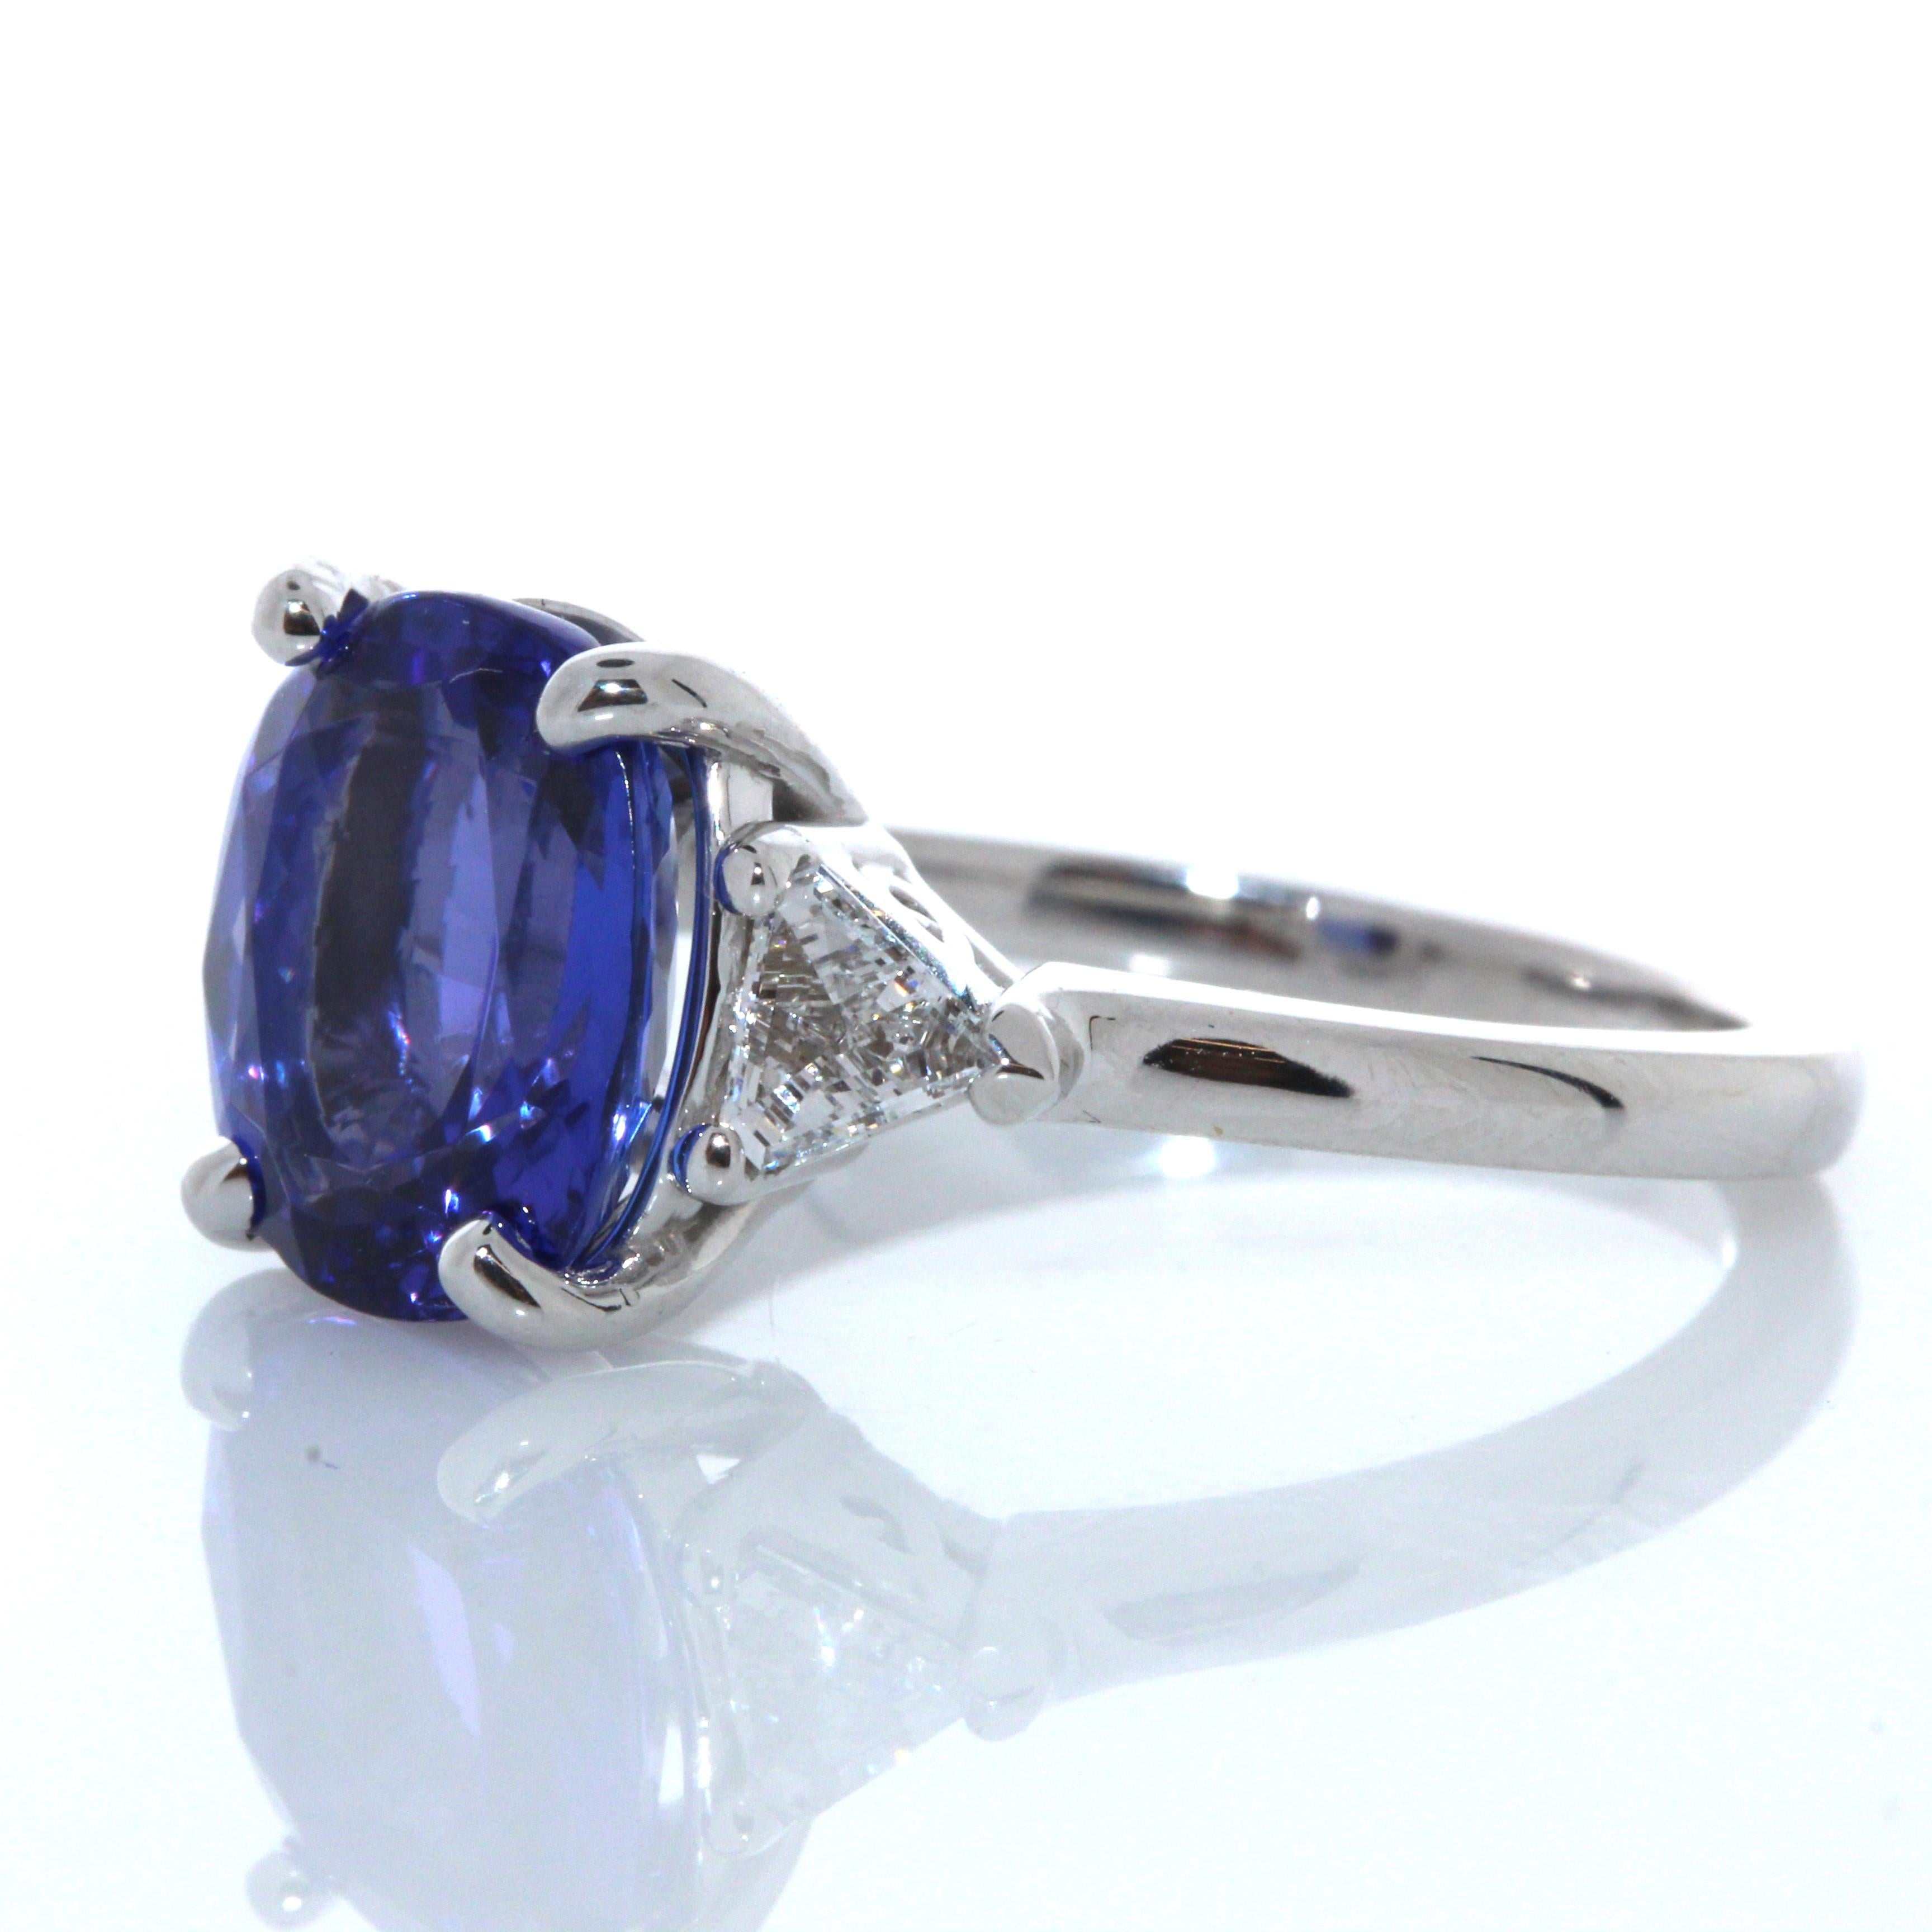 No one can resist being drawn in by the gorgeous 3.73 carat Cushion tanzanite center. The color of this gem is vivid blue-violet, sourced from the foothills of Mt. Kilimanjaro in Tanzania. Its color is the most desired - resembling fine blue